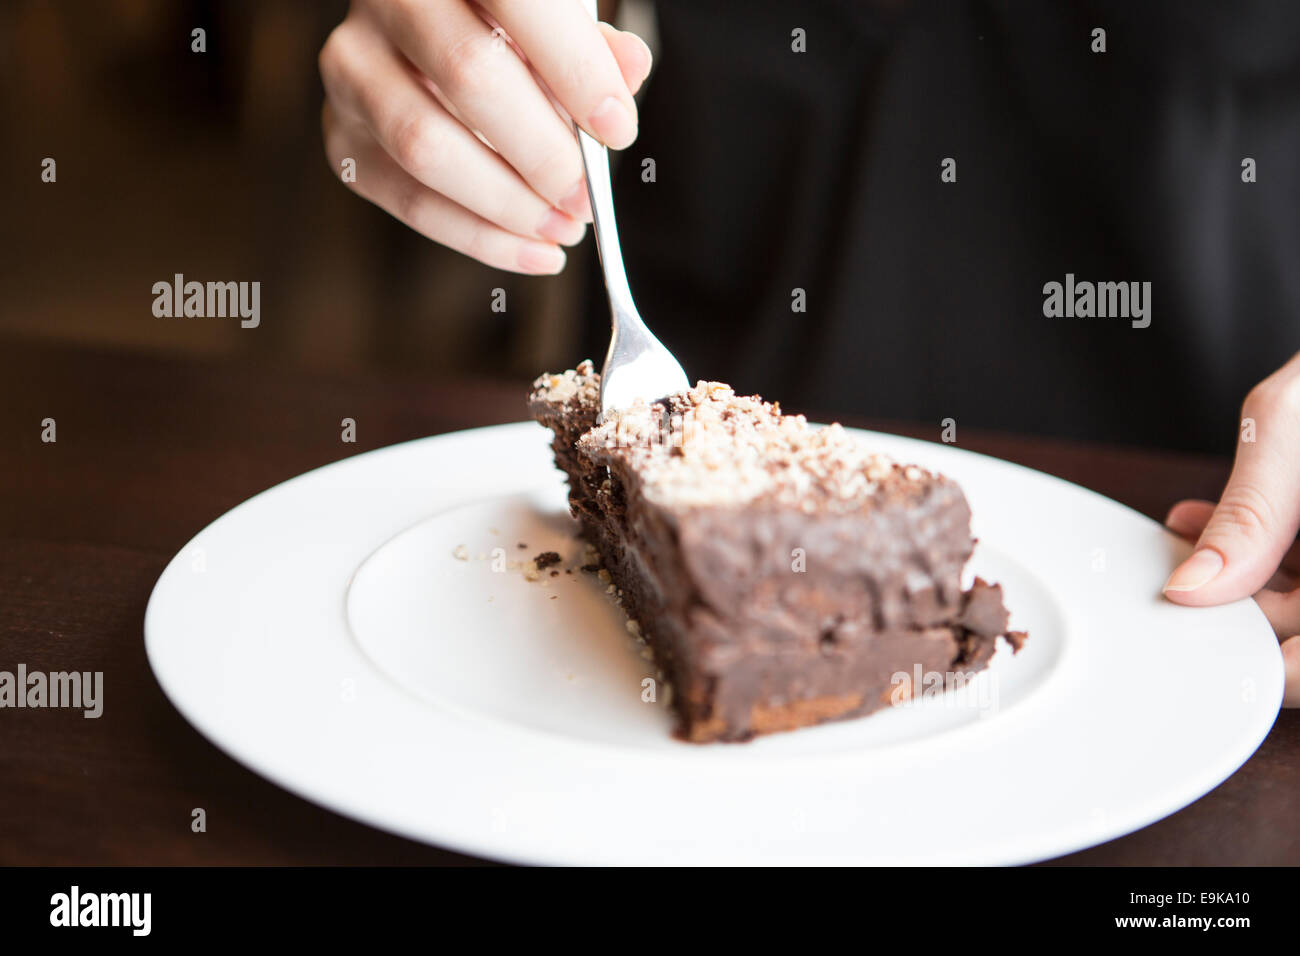 Close-up of woman's hand cutting chocolate pastry Stock Photo